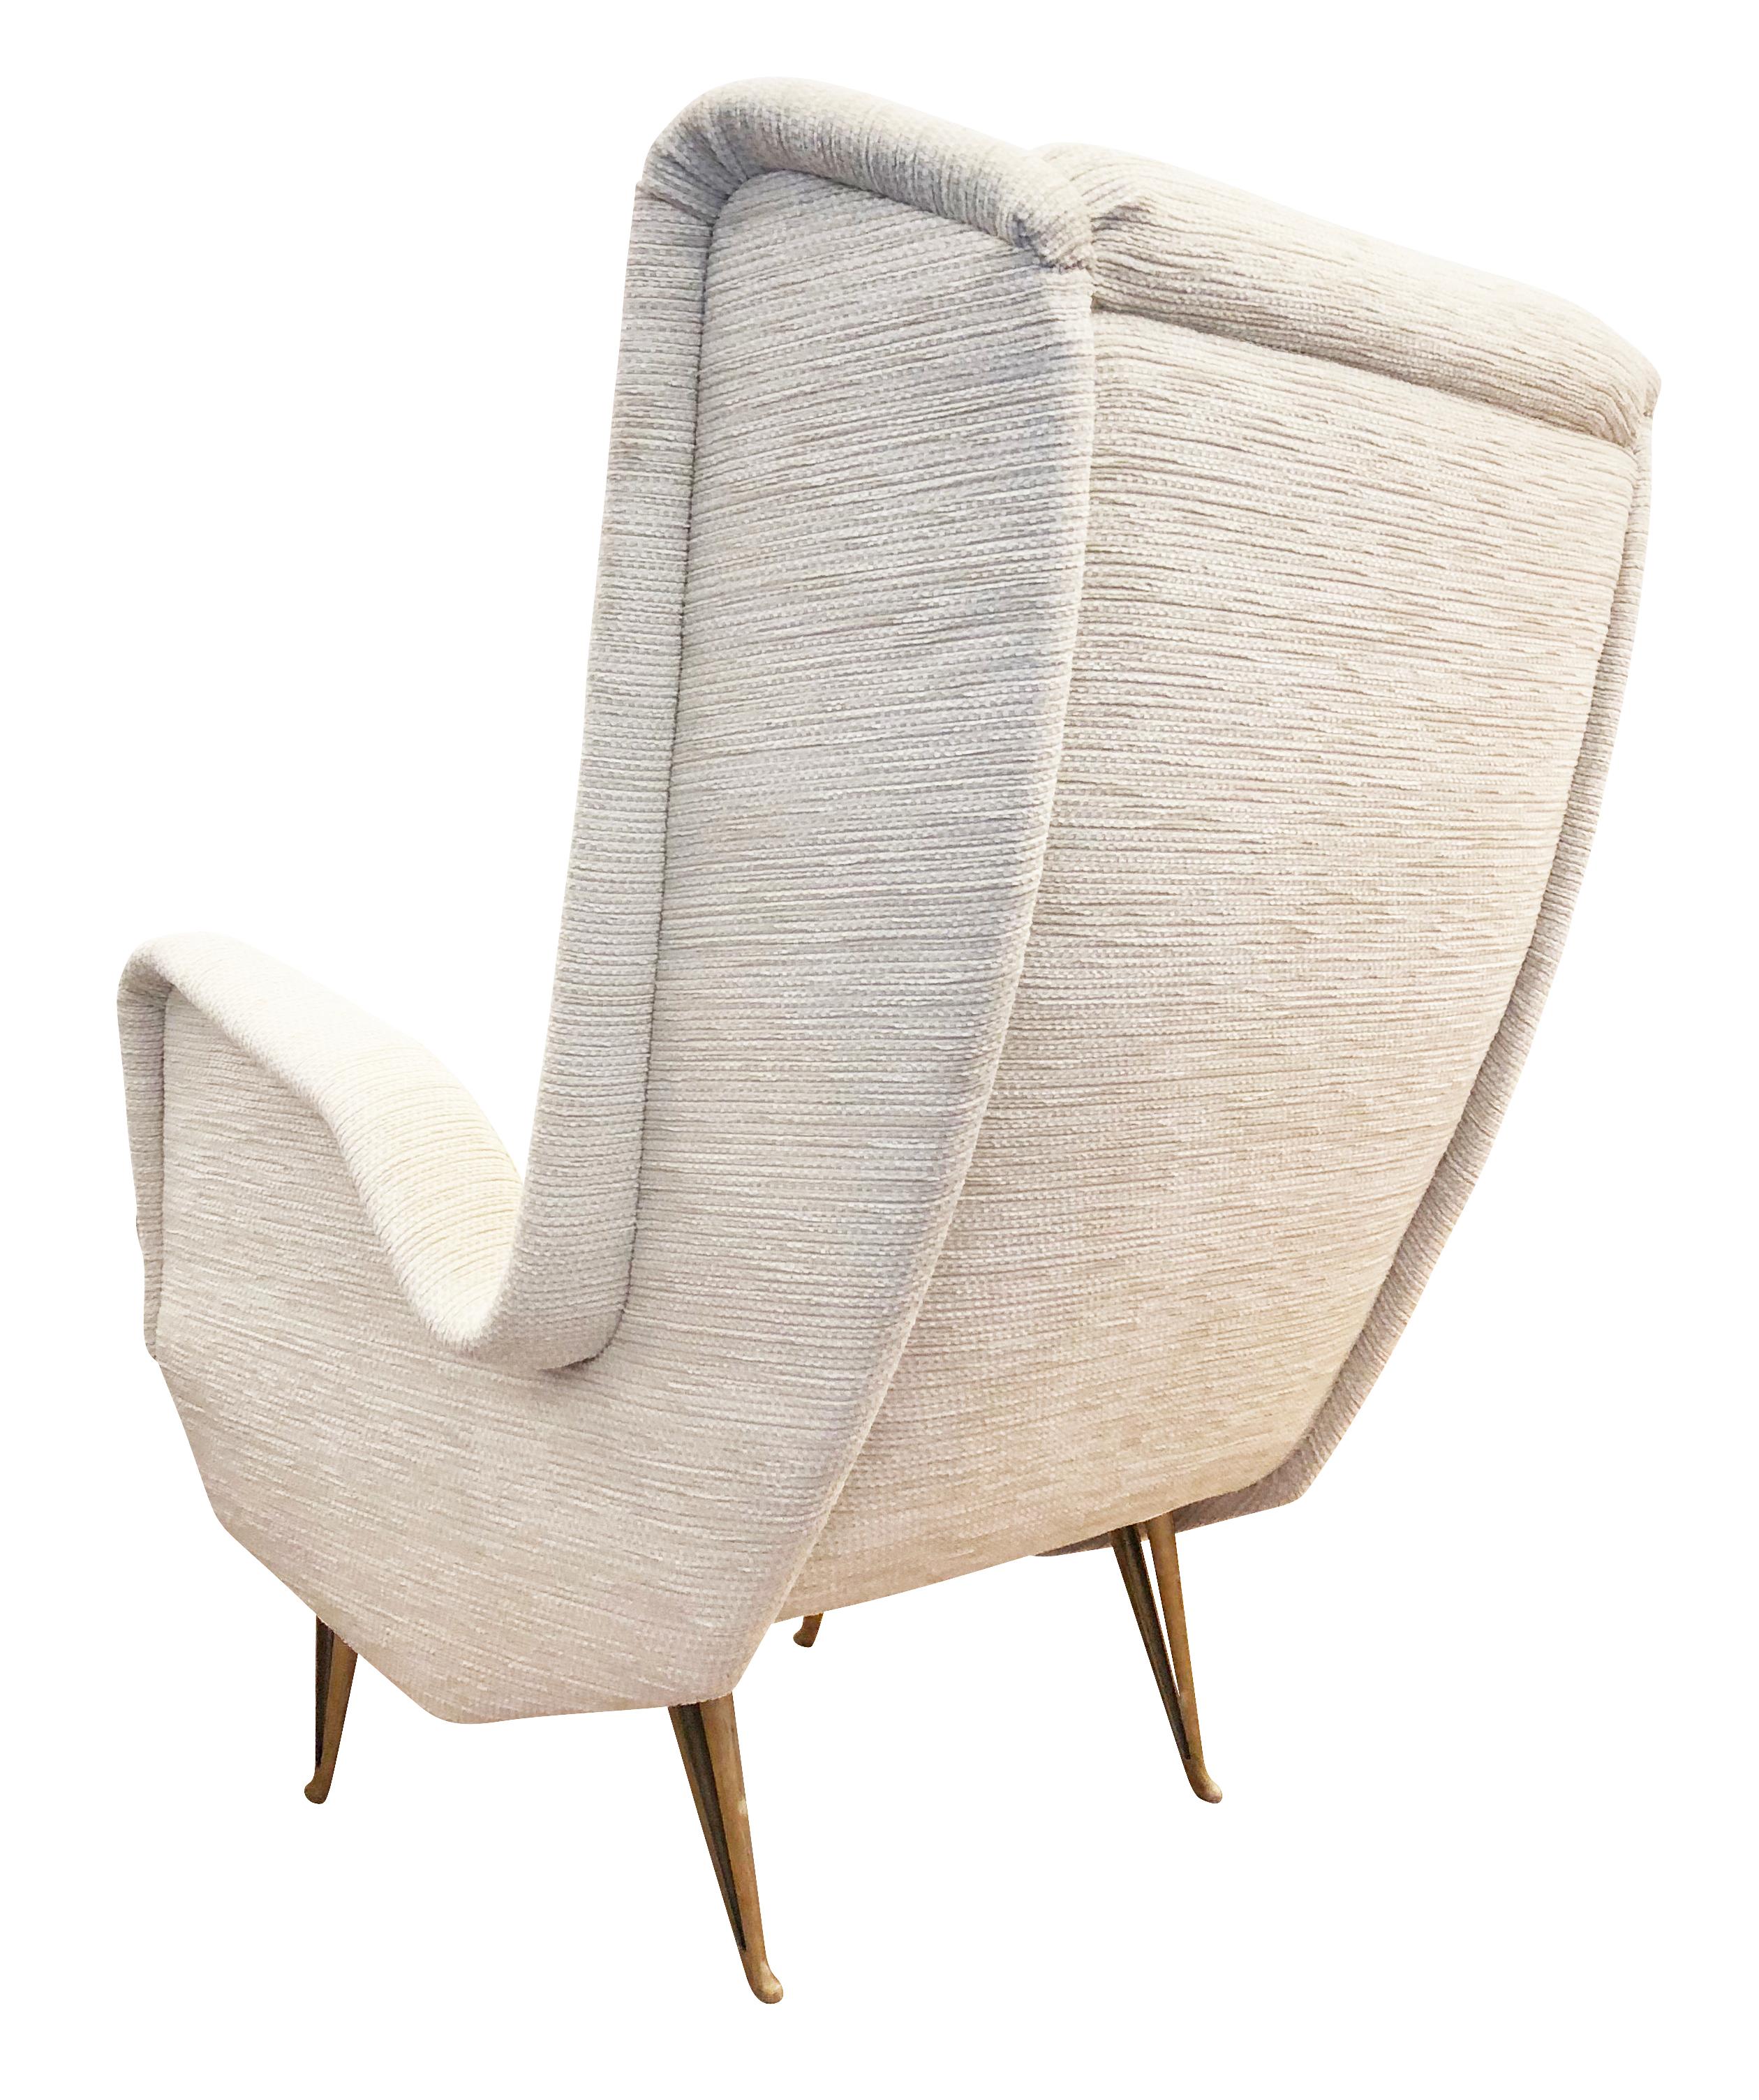 Mid-Century Modern Large Wing Chair by ISA Bergamo, Italy, 1960s